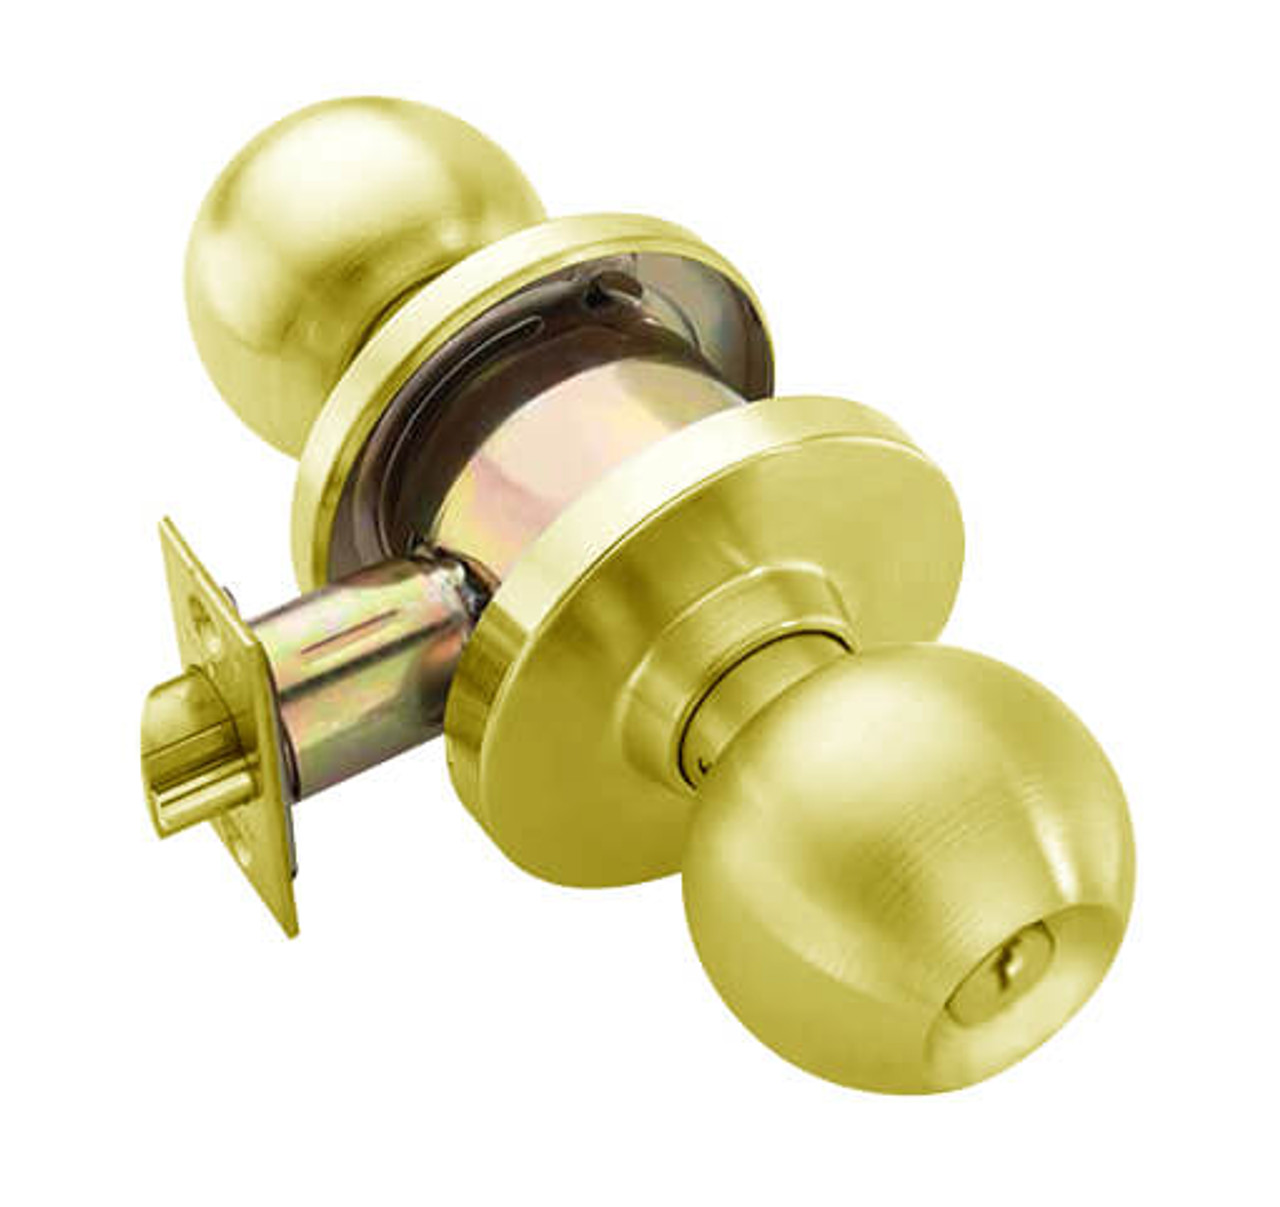 W711PD-H-605 Falcon W Series Cylindrical Apartment Entry Lock with Hana Knob Style in Bright Brass Finish